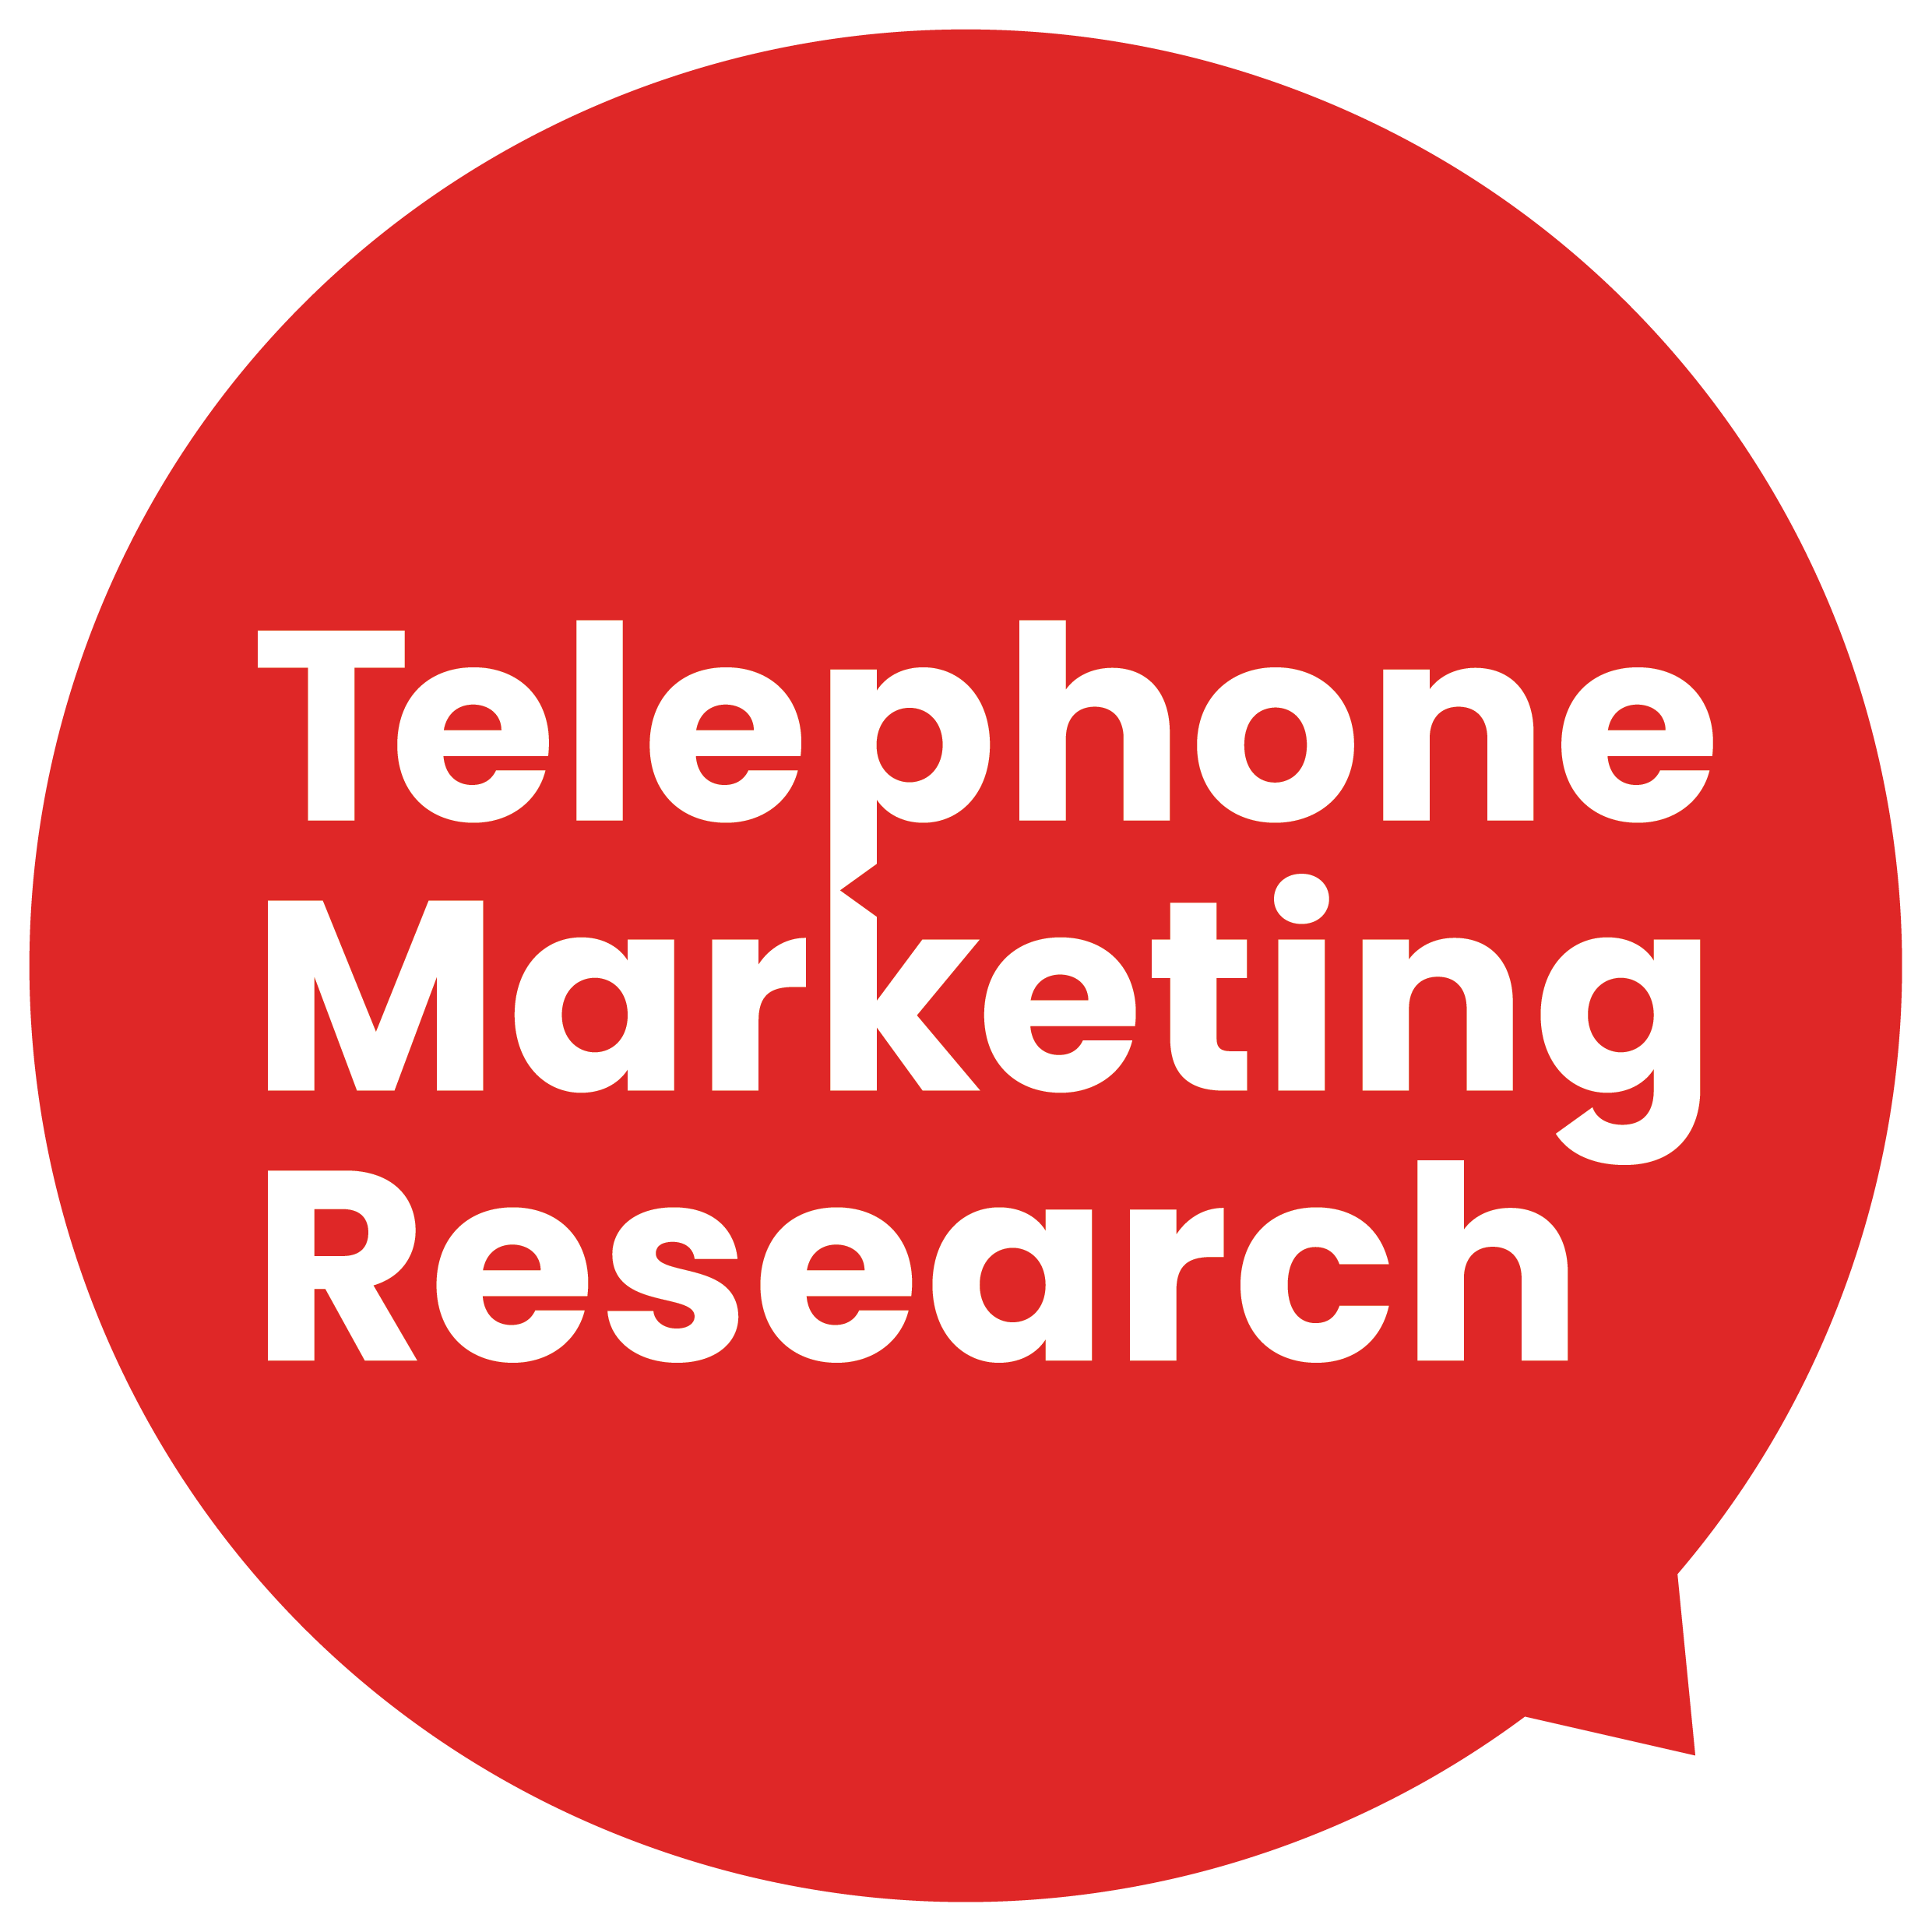 Telephone Marketing Research